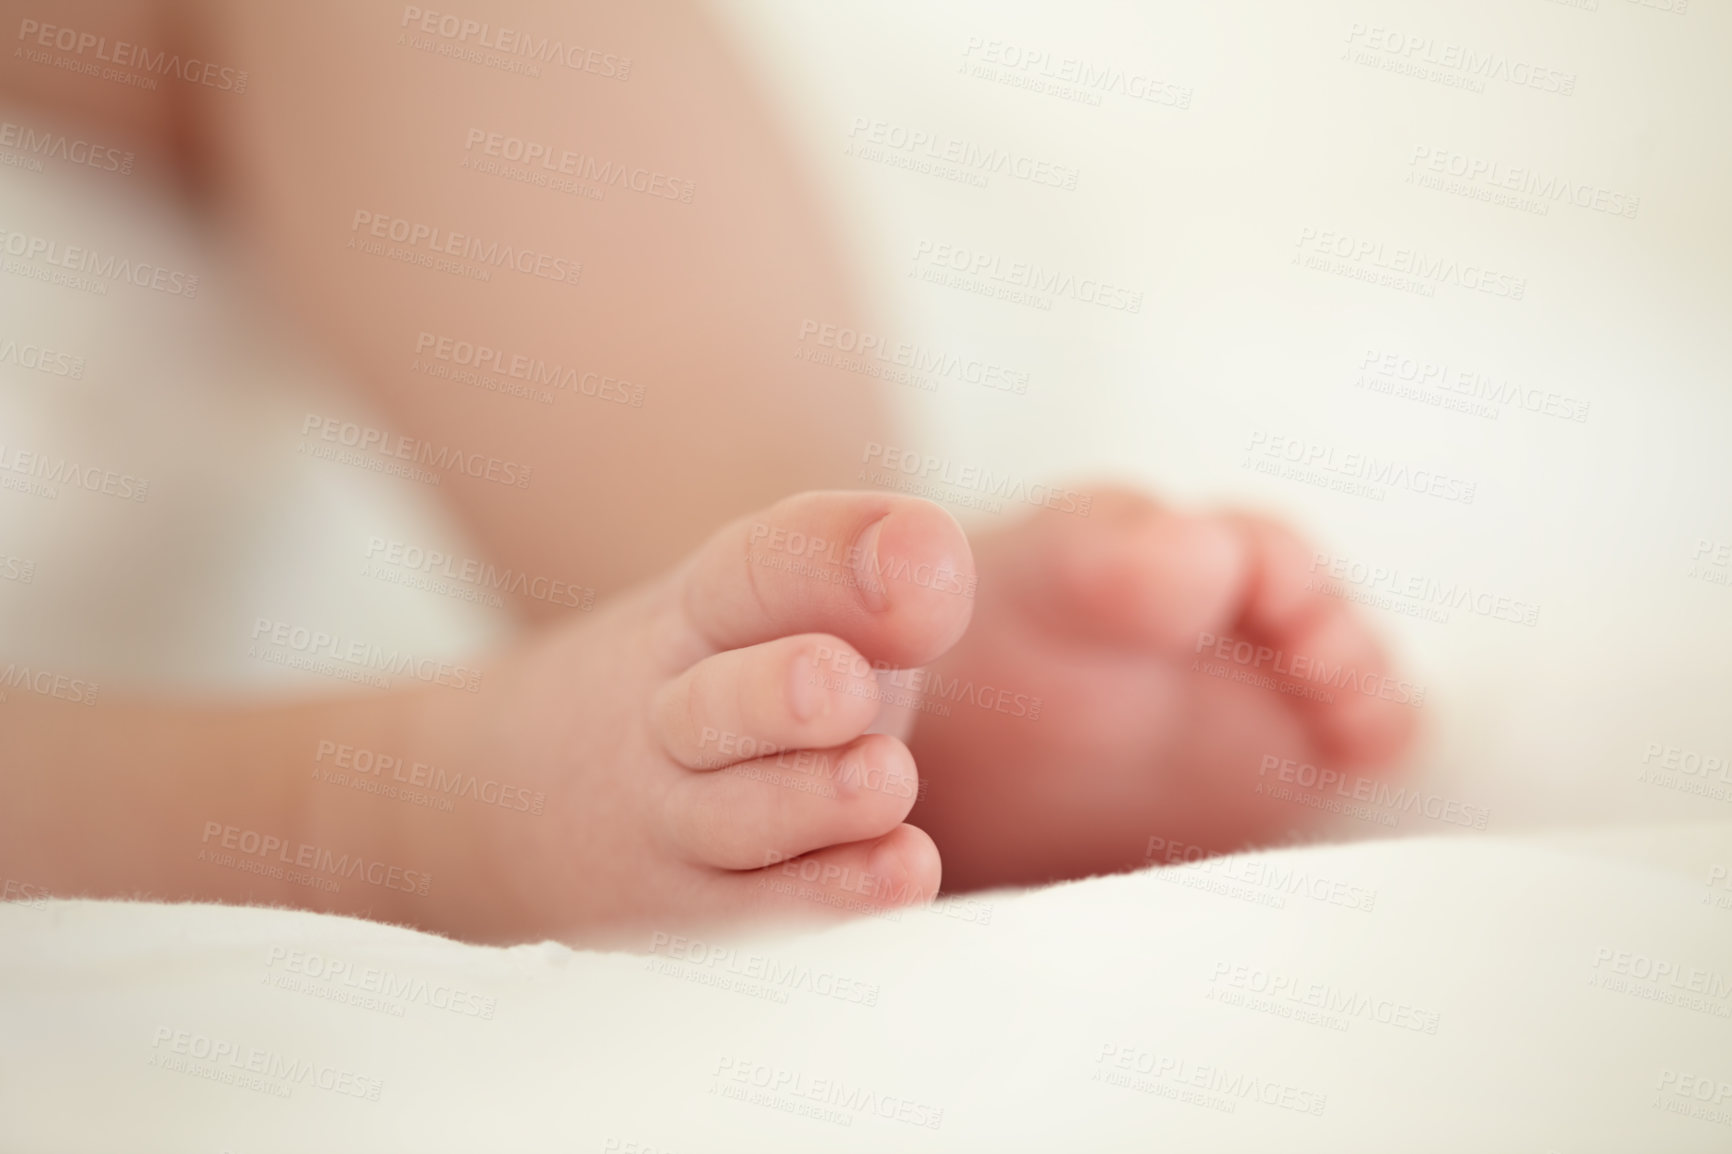 Buy stock photo Child, newborn and feet or toes closeup or infant development, safety care or growth support. Baby, foot and soft skin asleep for healthy birth on blanket love or tiny legs or wellness, youth in home